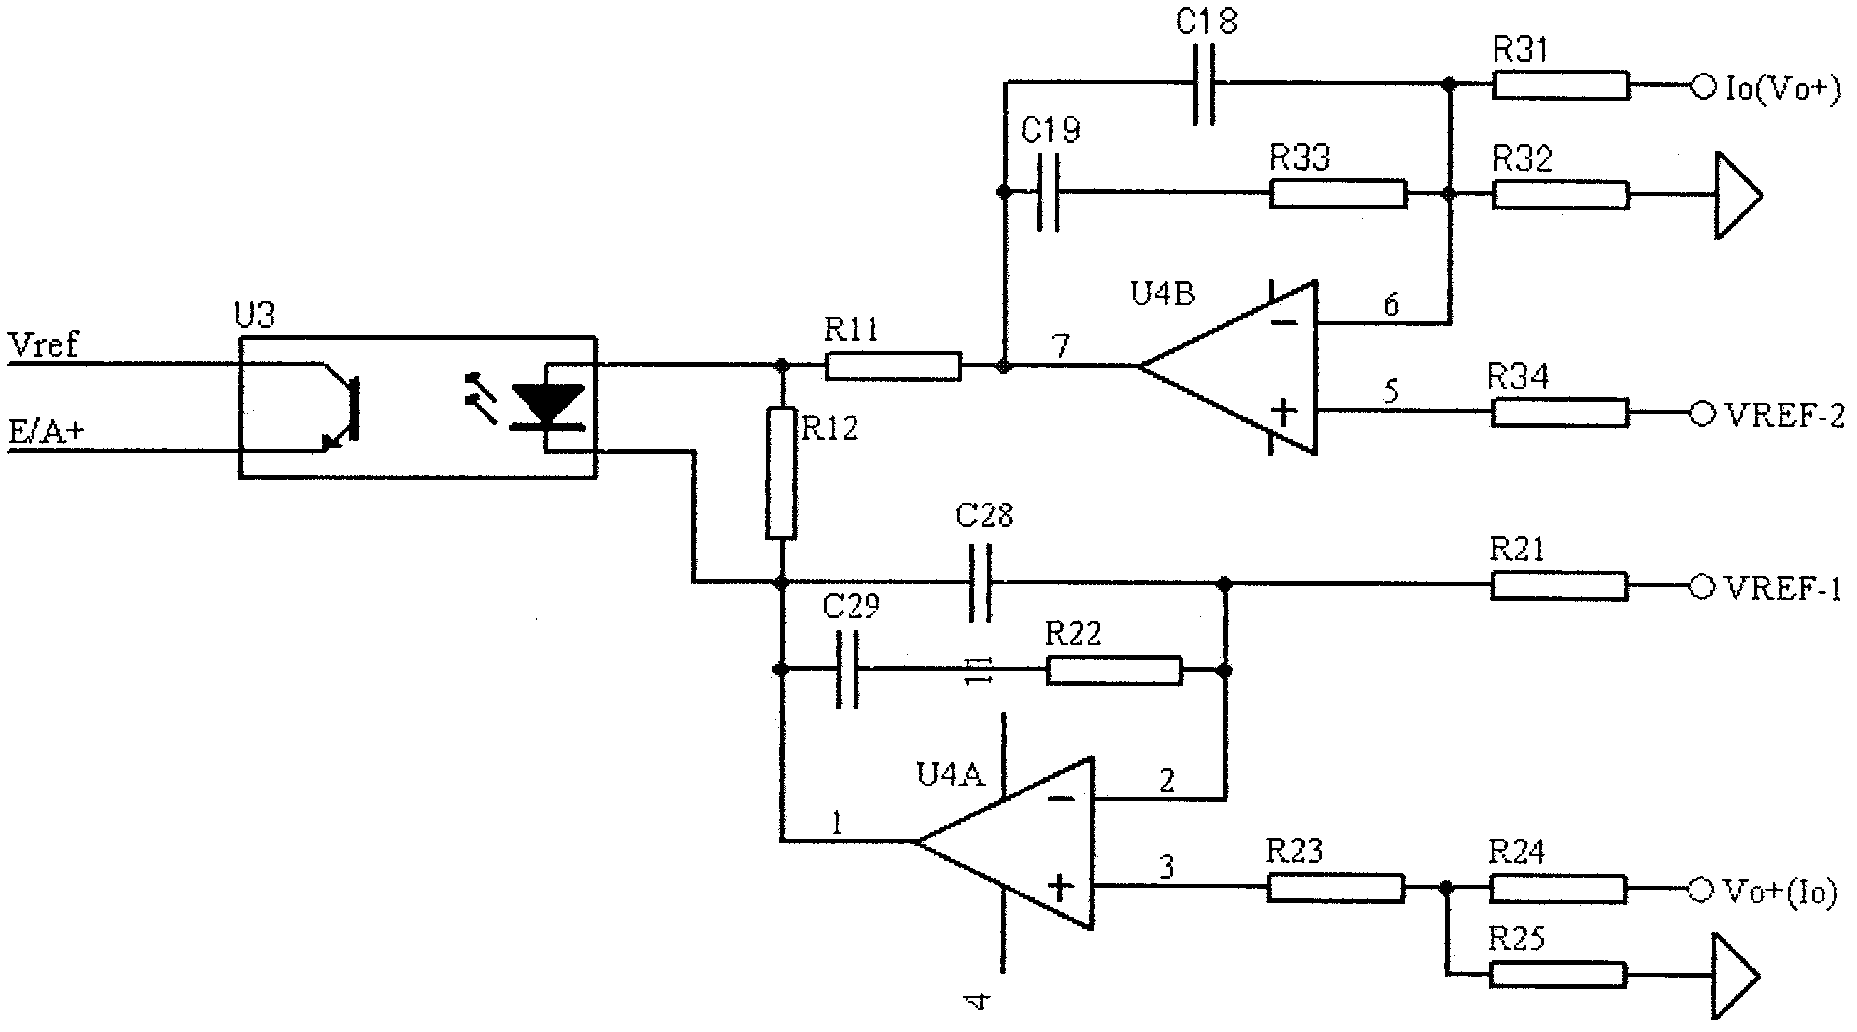 Constant-voltage and constant-current control circuit applied to power supply technology